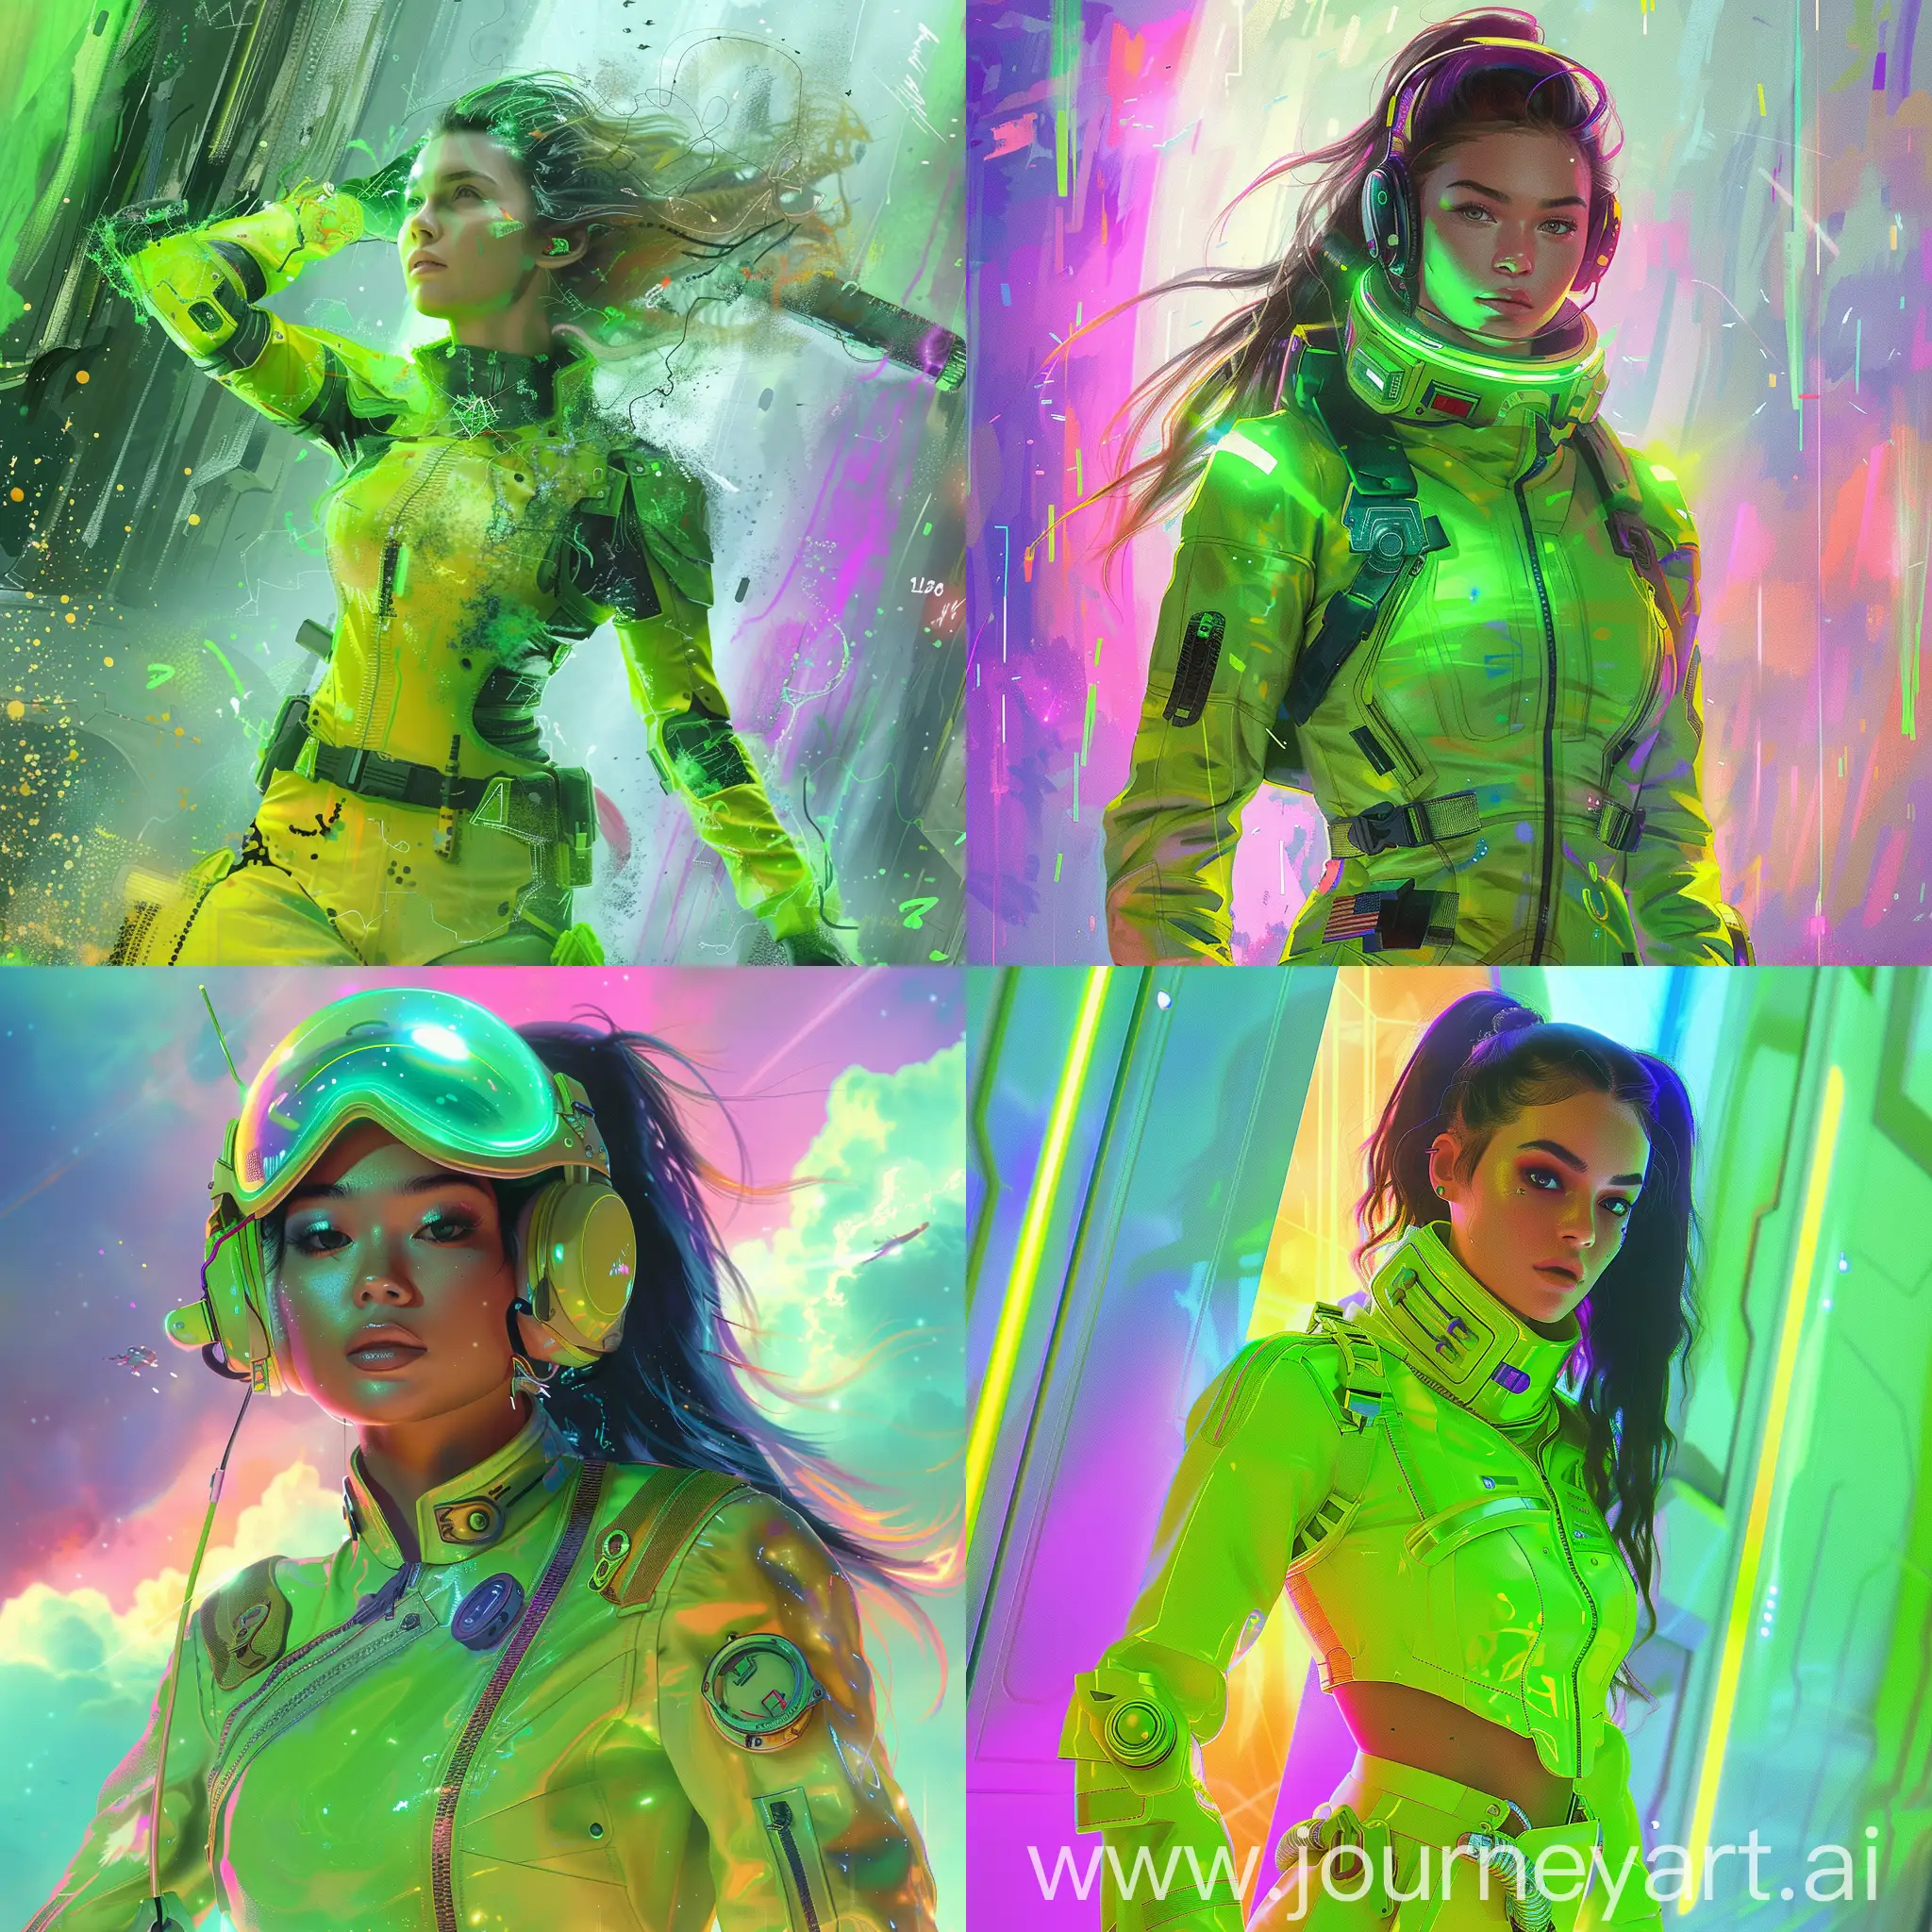 Space-Battle-Woman-in-Neon-Green-Outfit-Amid-Pastel-Colors